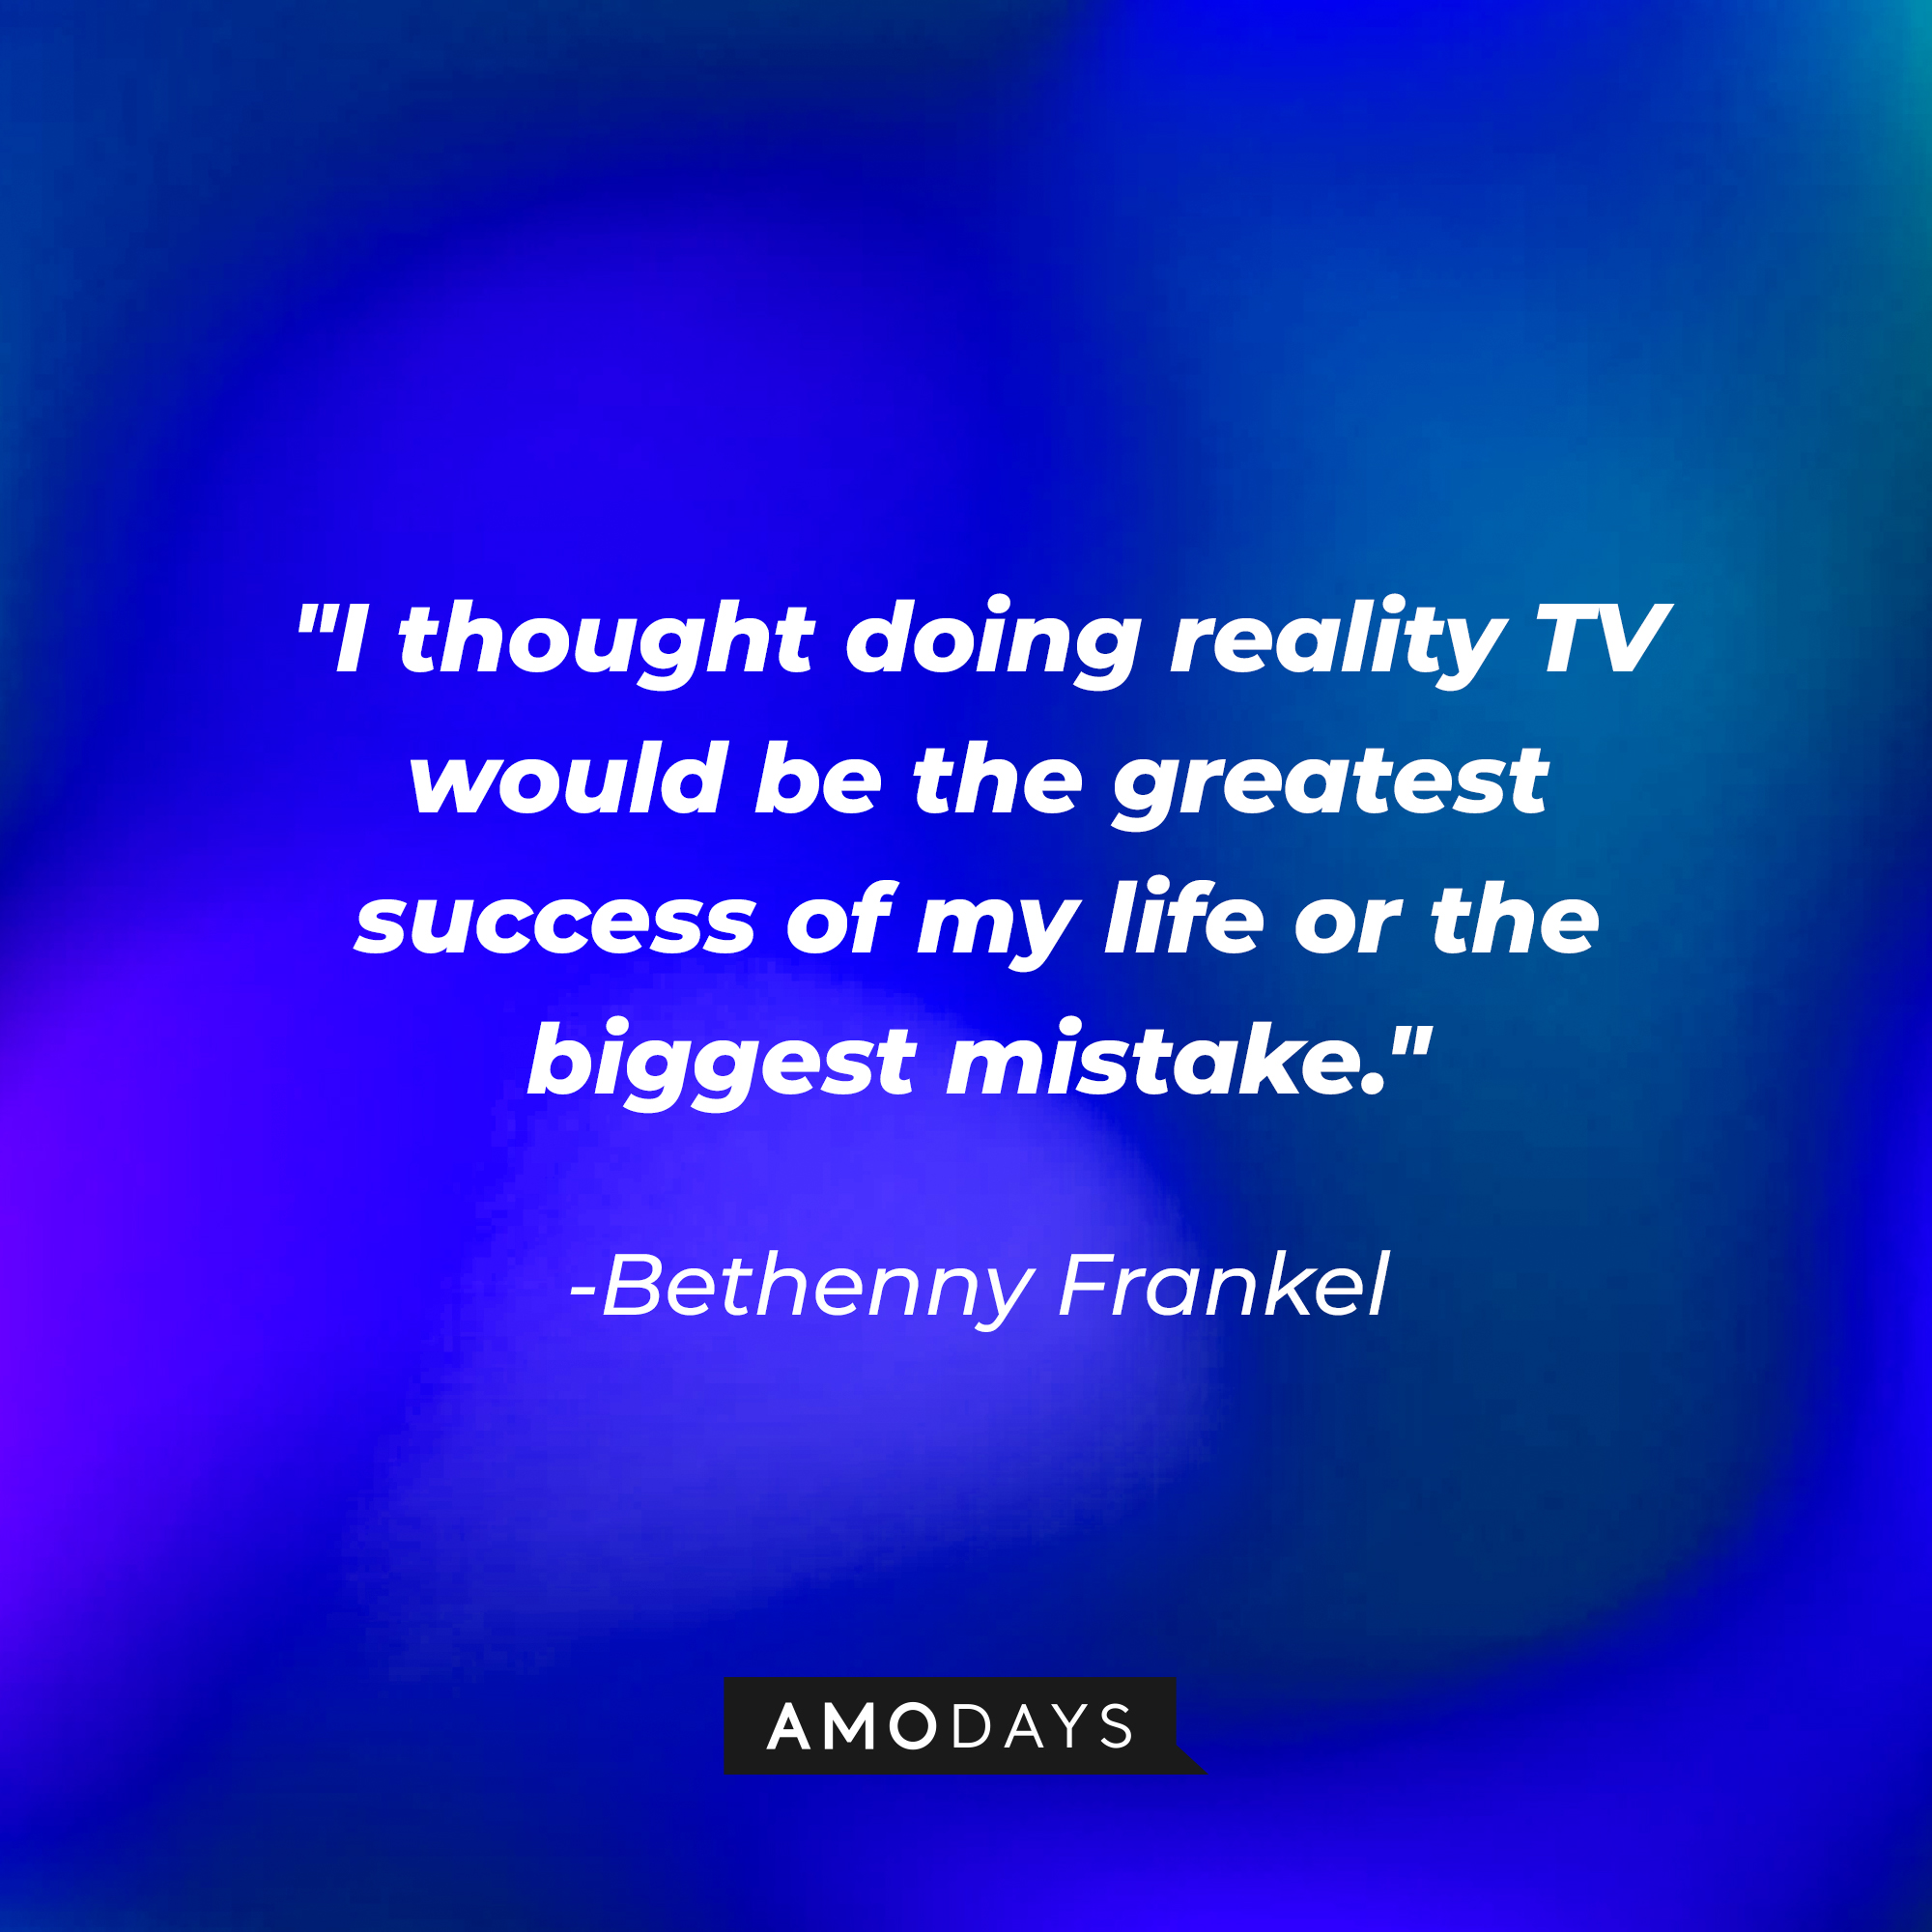 Bethenny Frankel's quote: "I thought doing reality TV would be the greatest success of my life or the biggest mistake." | Source: Amodays